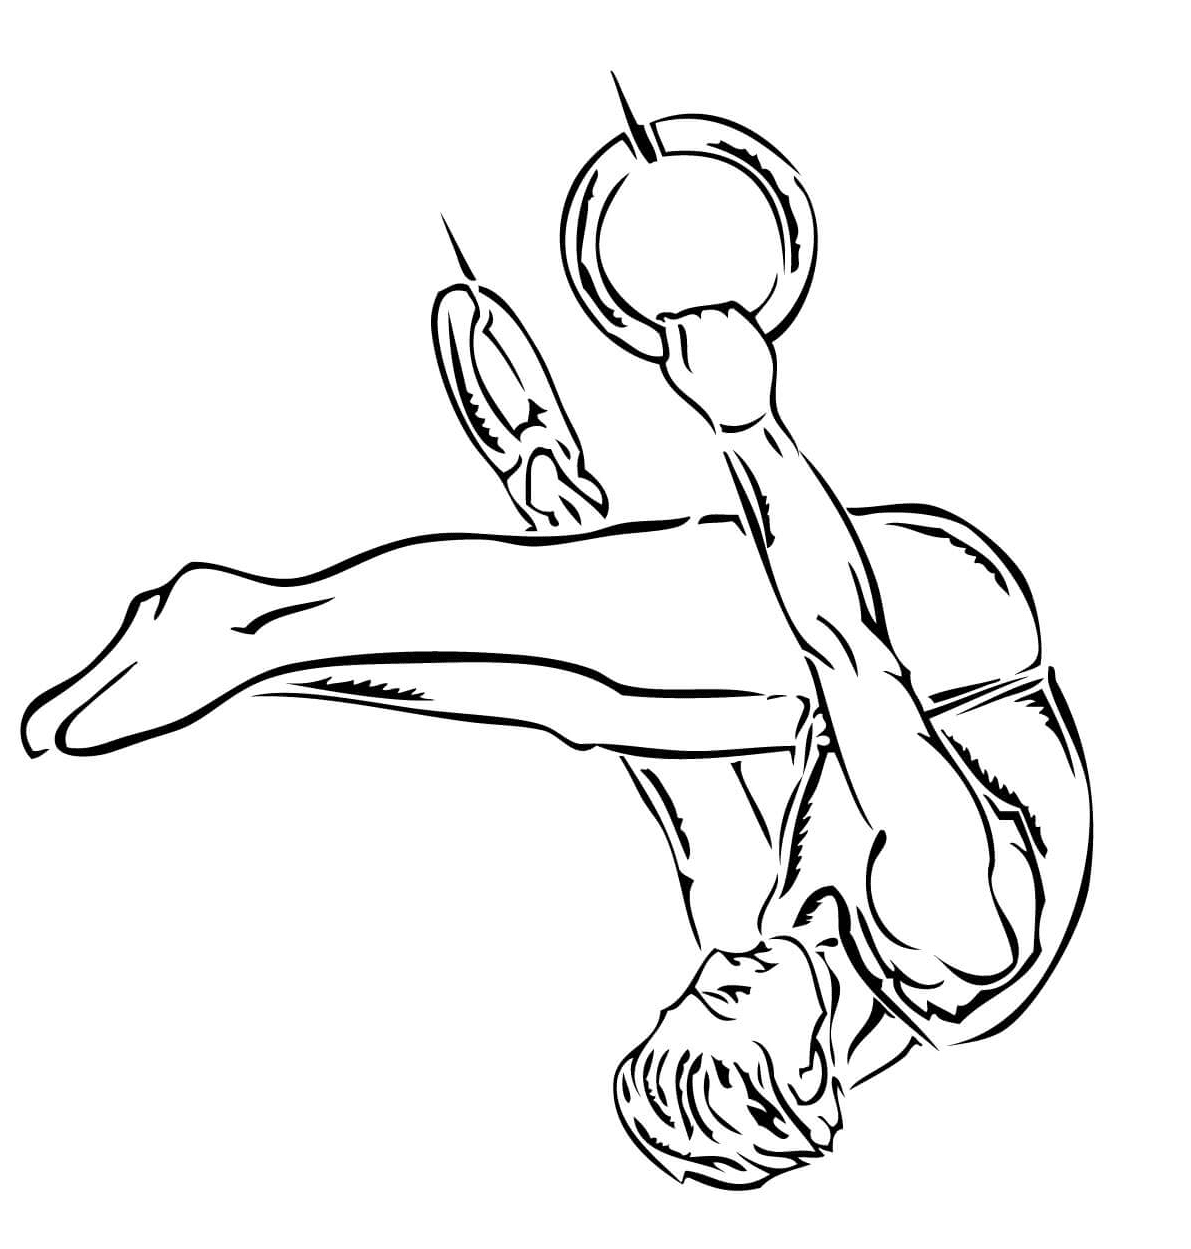 Gymnastic Ring Performance to Print Coloring Page